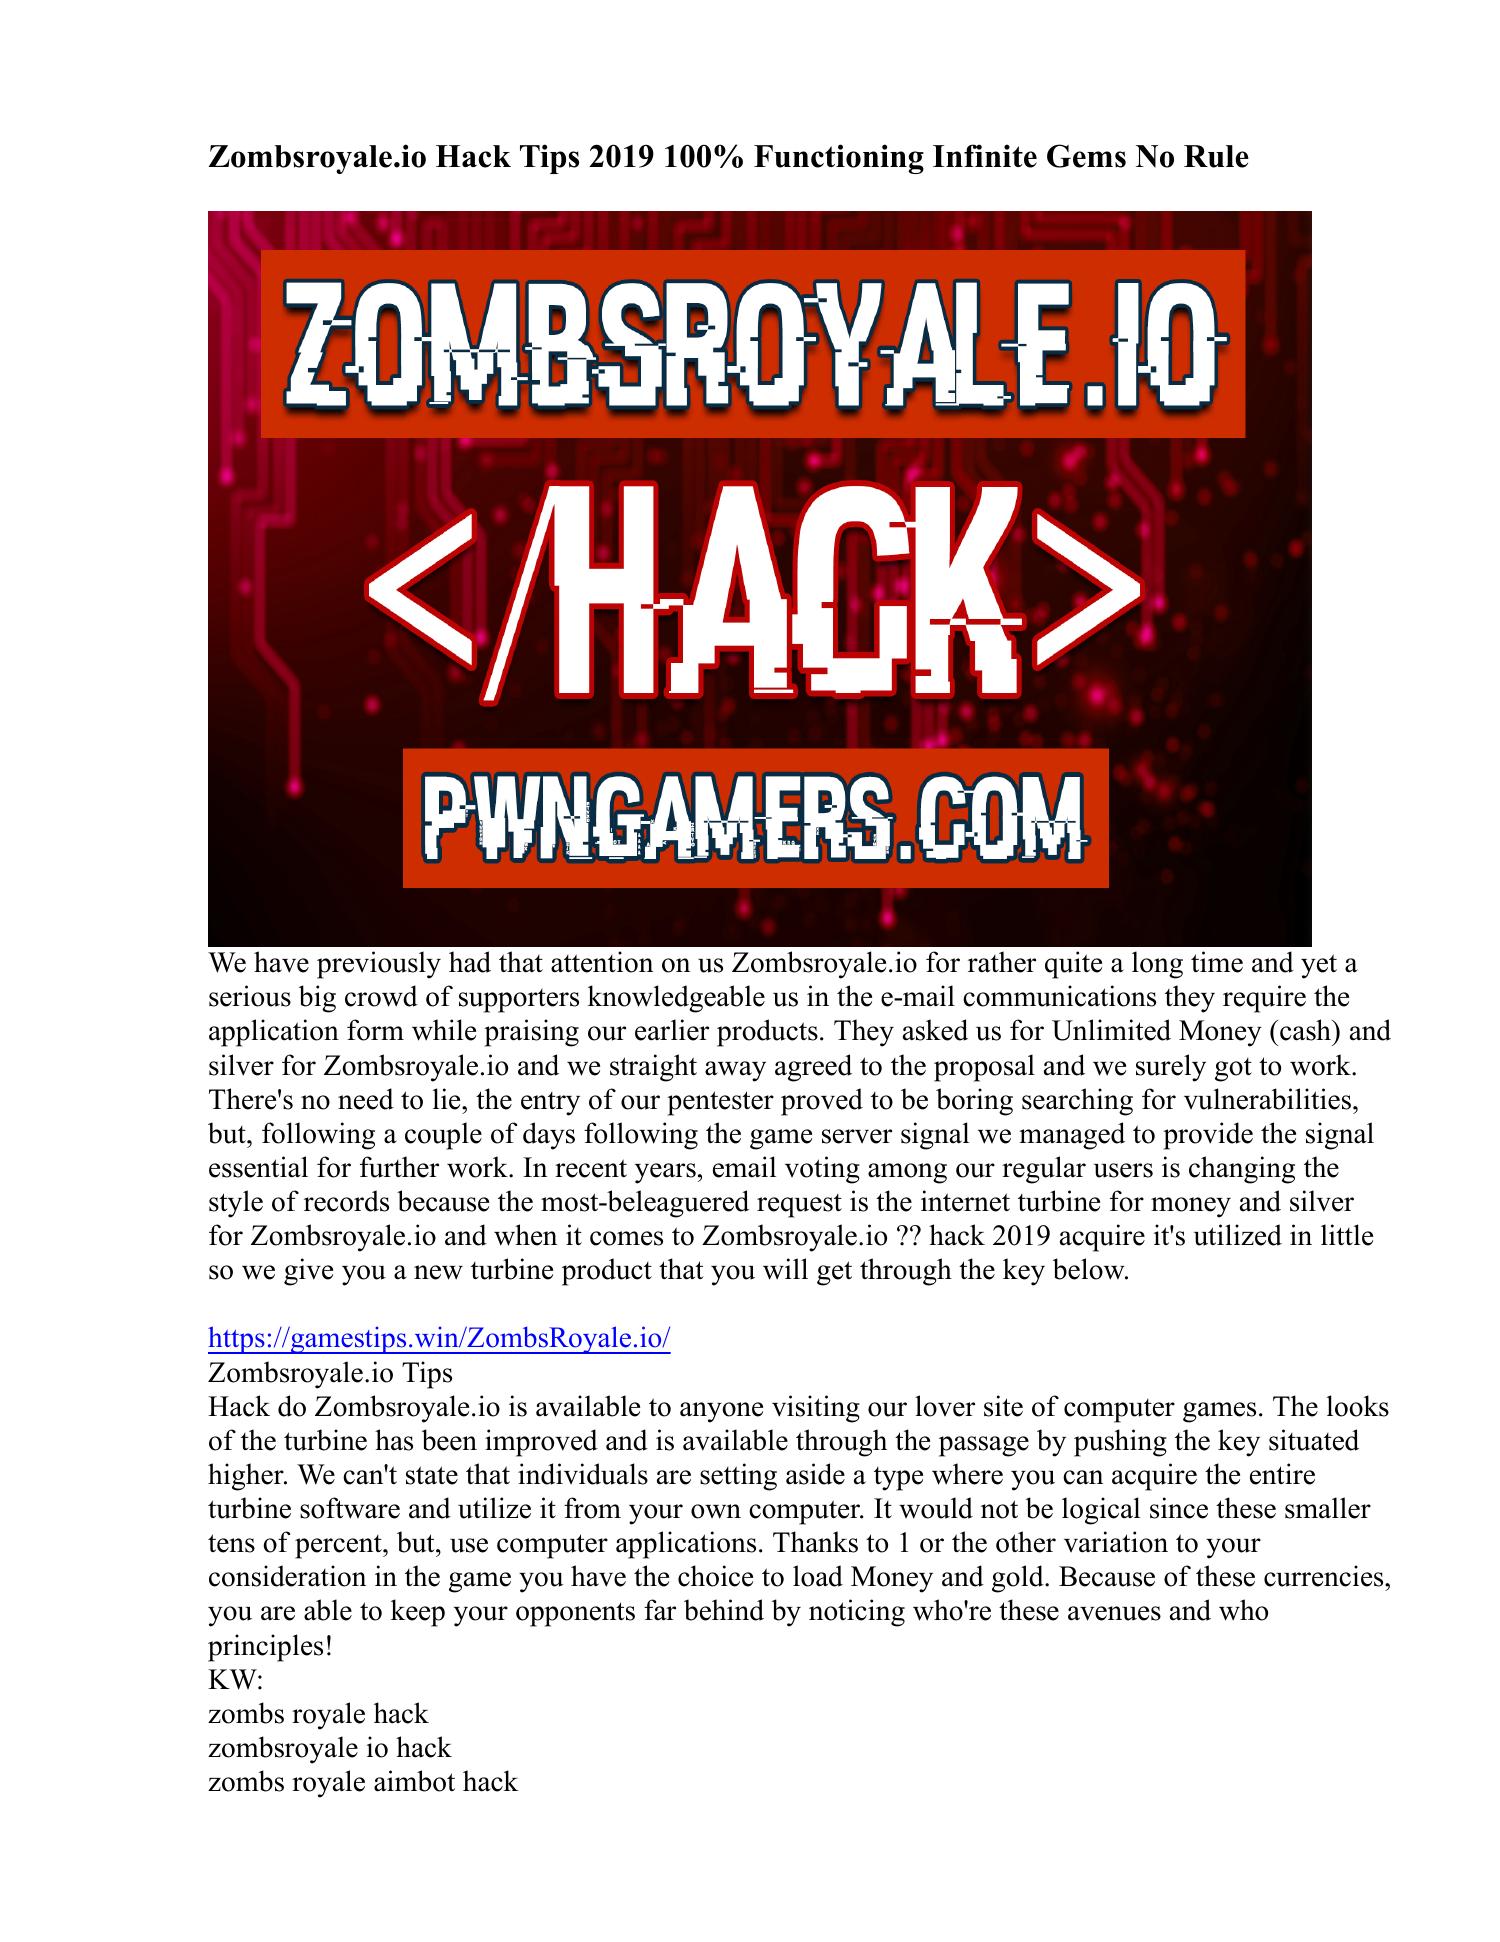 How To Hack In Zombsroyale.io (Free gems & Aimbot) 